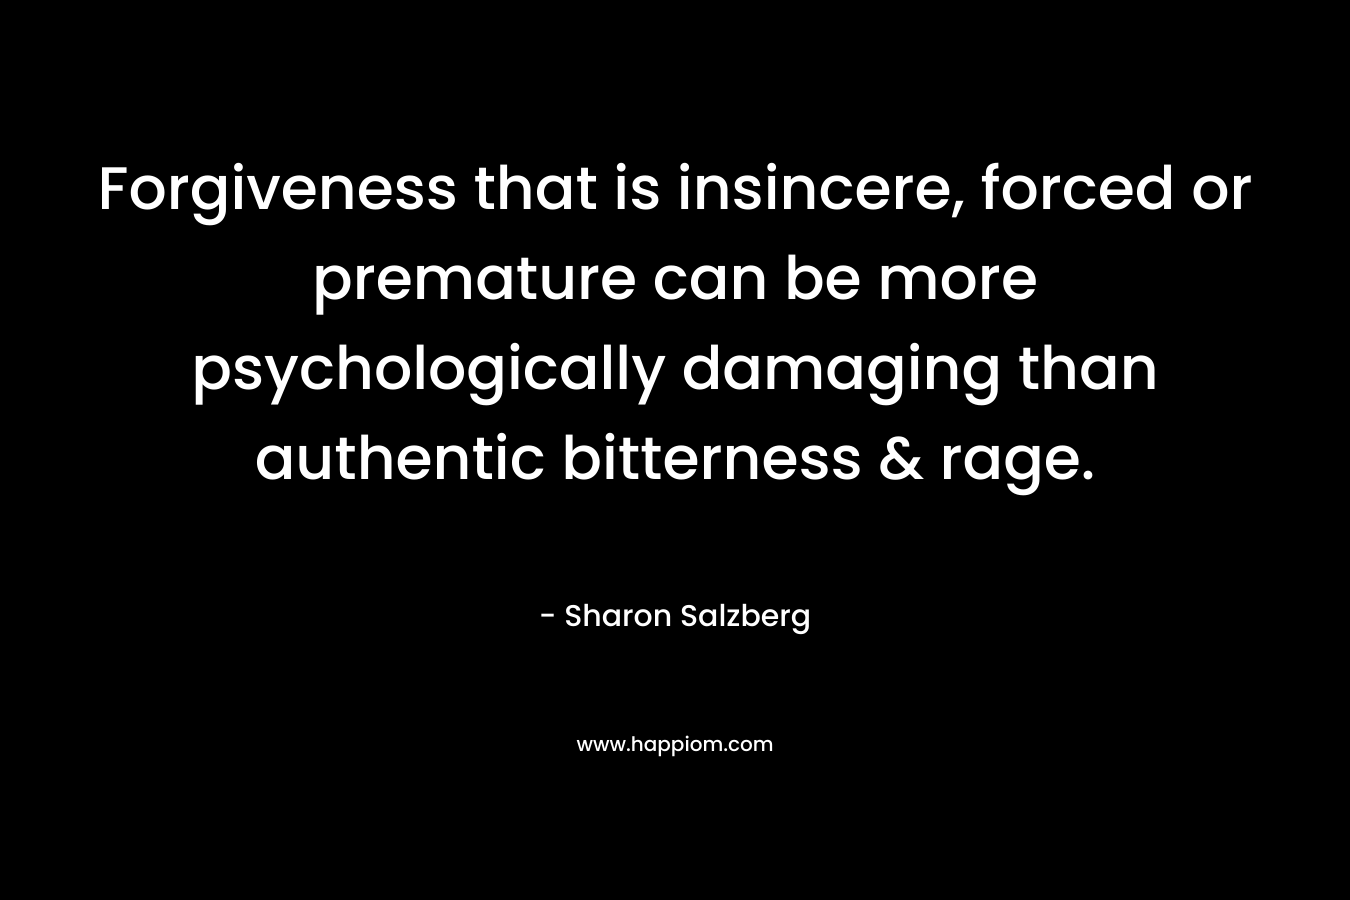 Forgiveness that is insincere, forced or premature can be more psychologically damaging than authentic bitterness & rage.